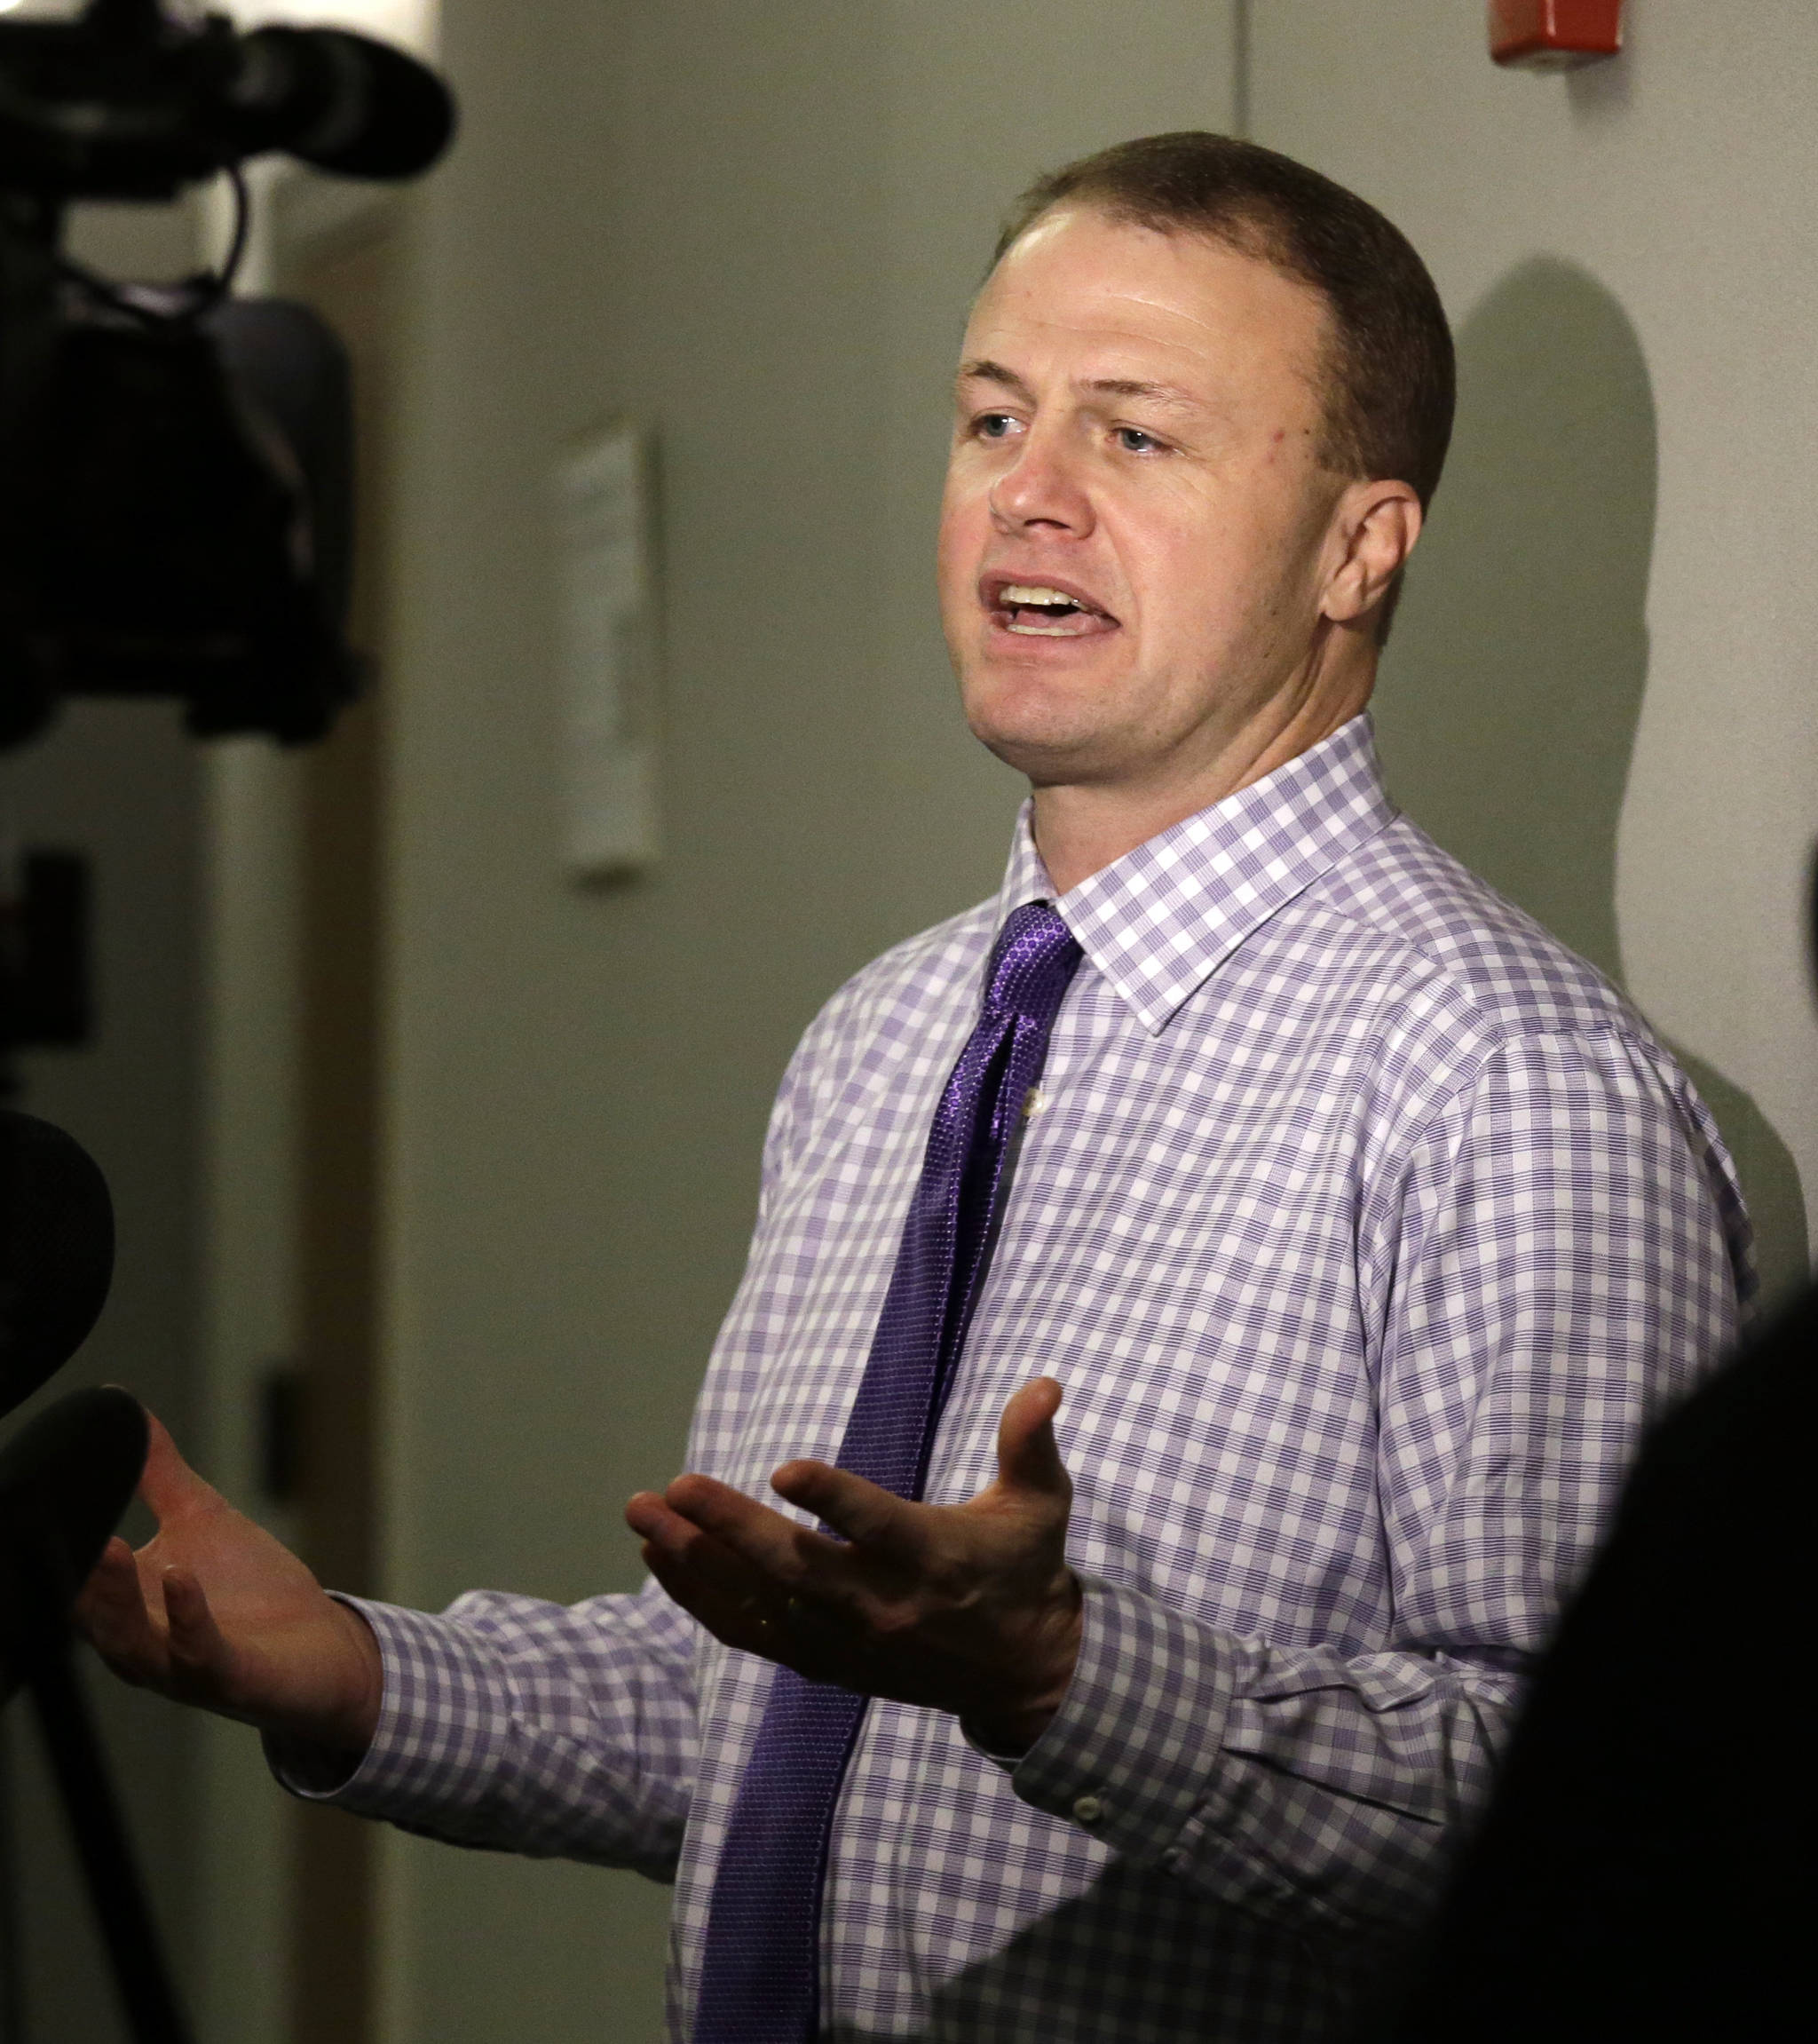 In this Jan. 21, 2016, photo, Tim Eyman speaks with reporters after hearing that a judge struck down his latest tax-limiting measure in Olympia. (Elaine Thompson/The Associated Press)